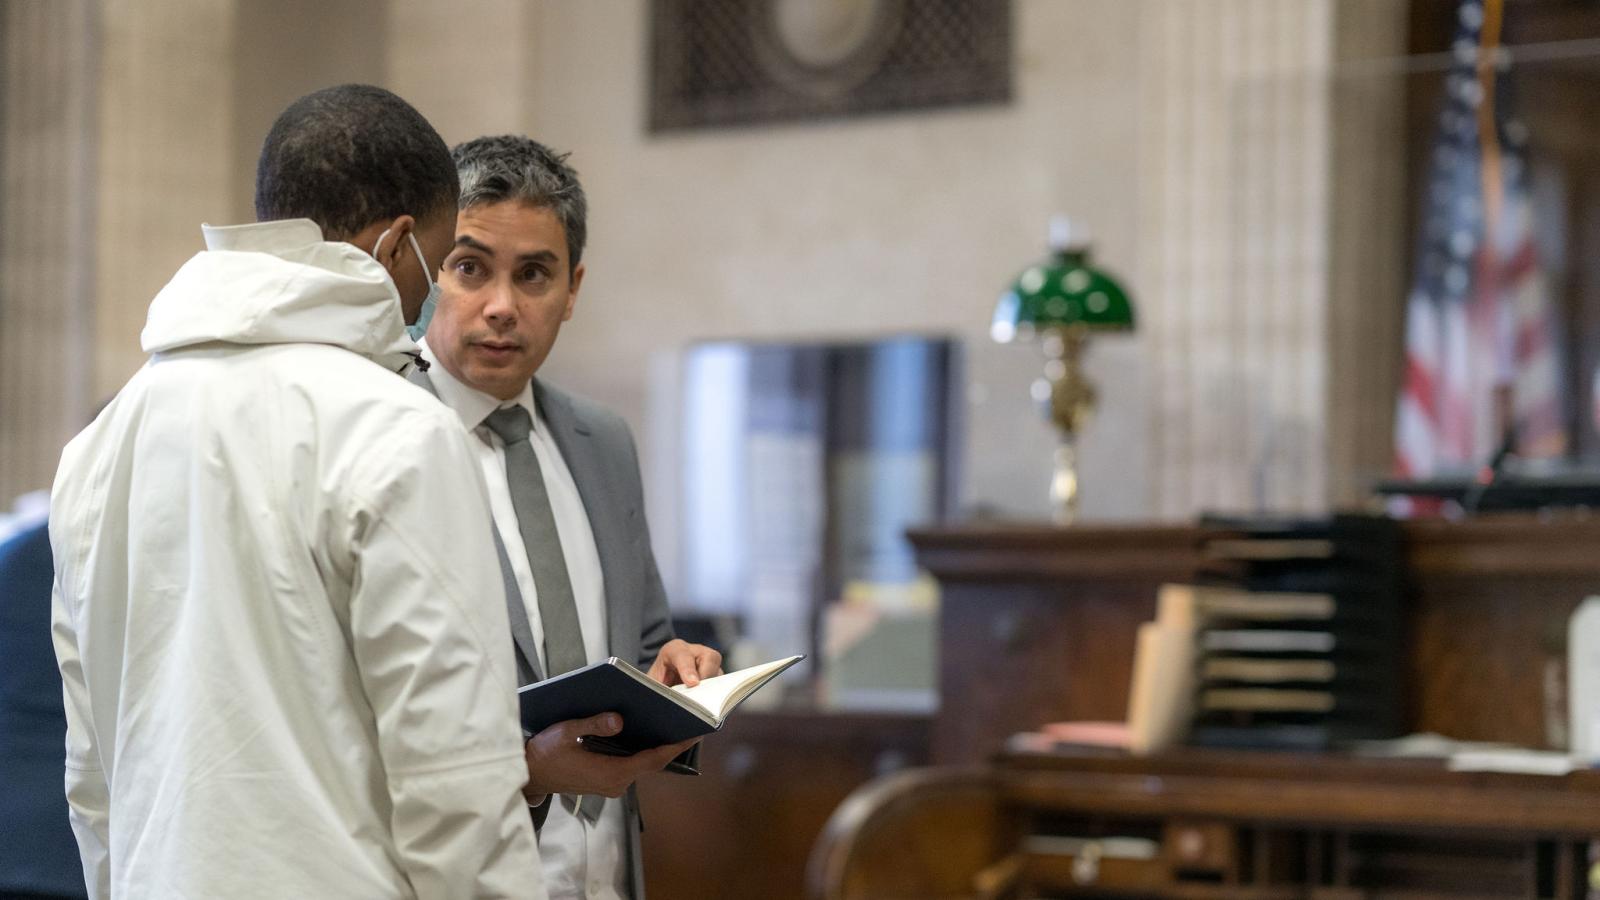 Assistant Public Defender consults with his client in a courtroom